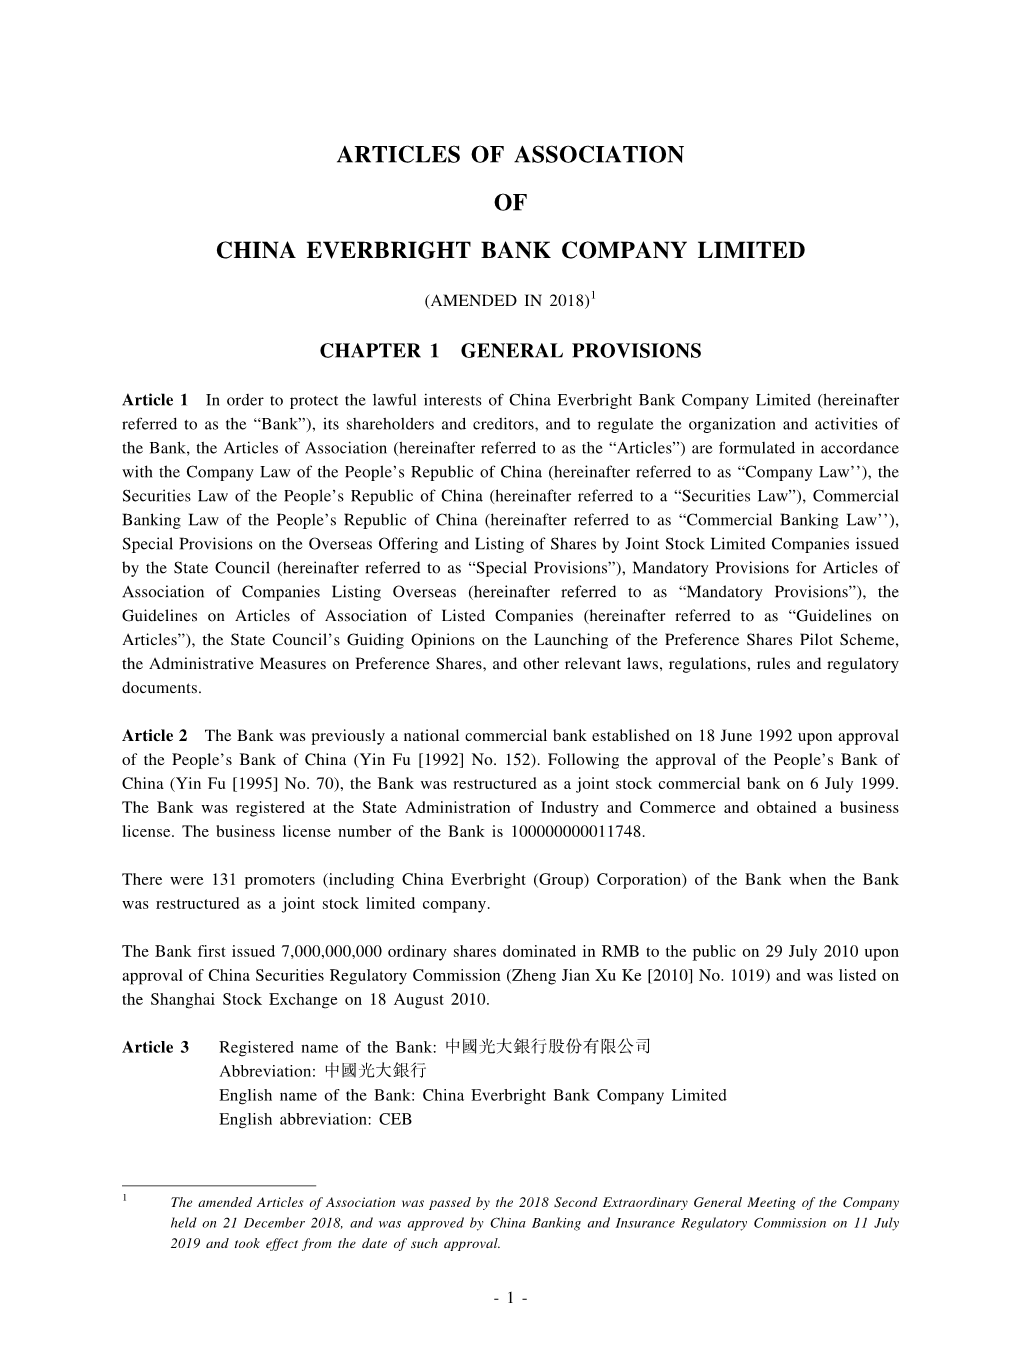 Articles of Association of China Everbright Bank